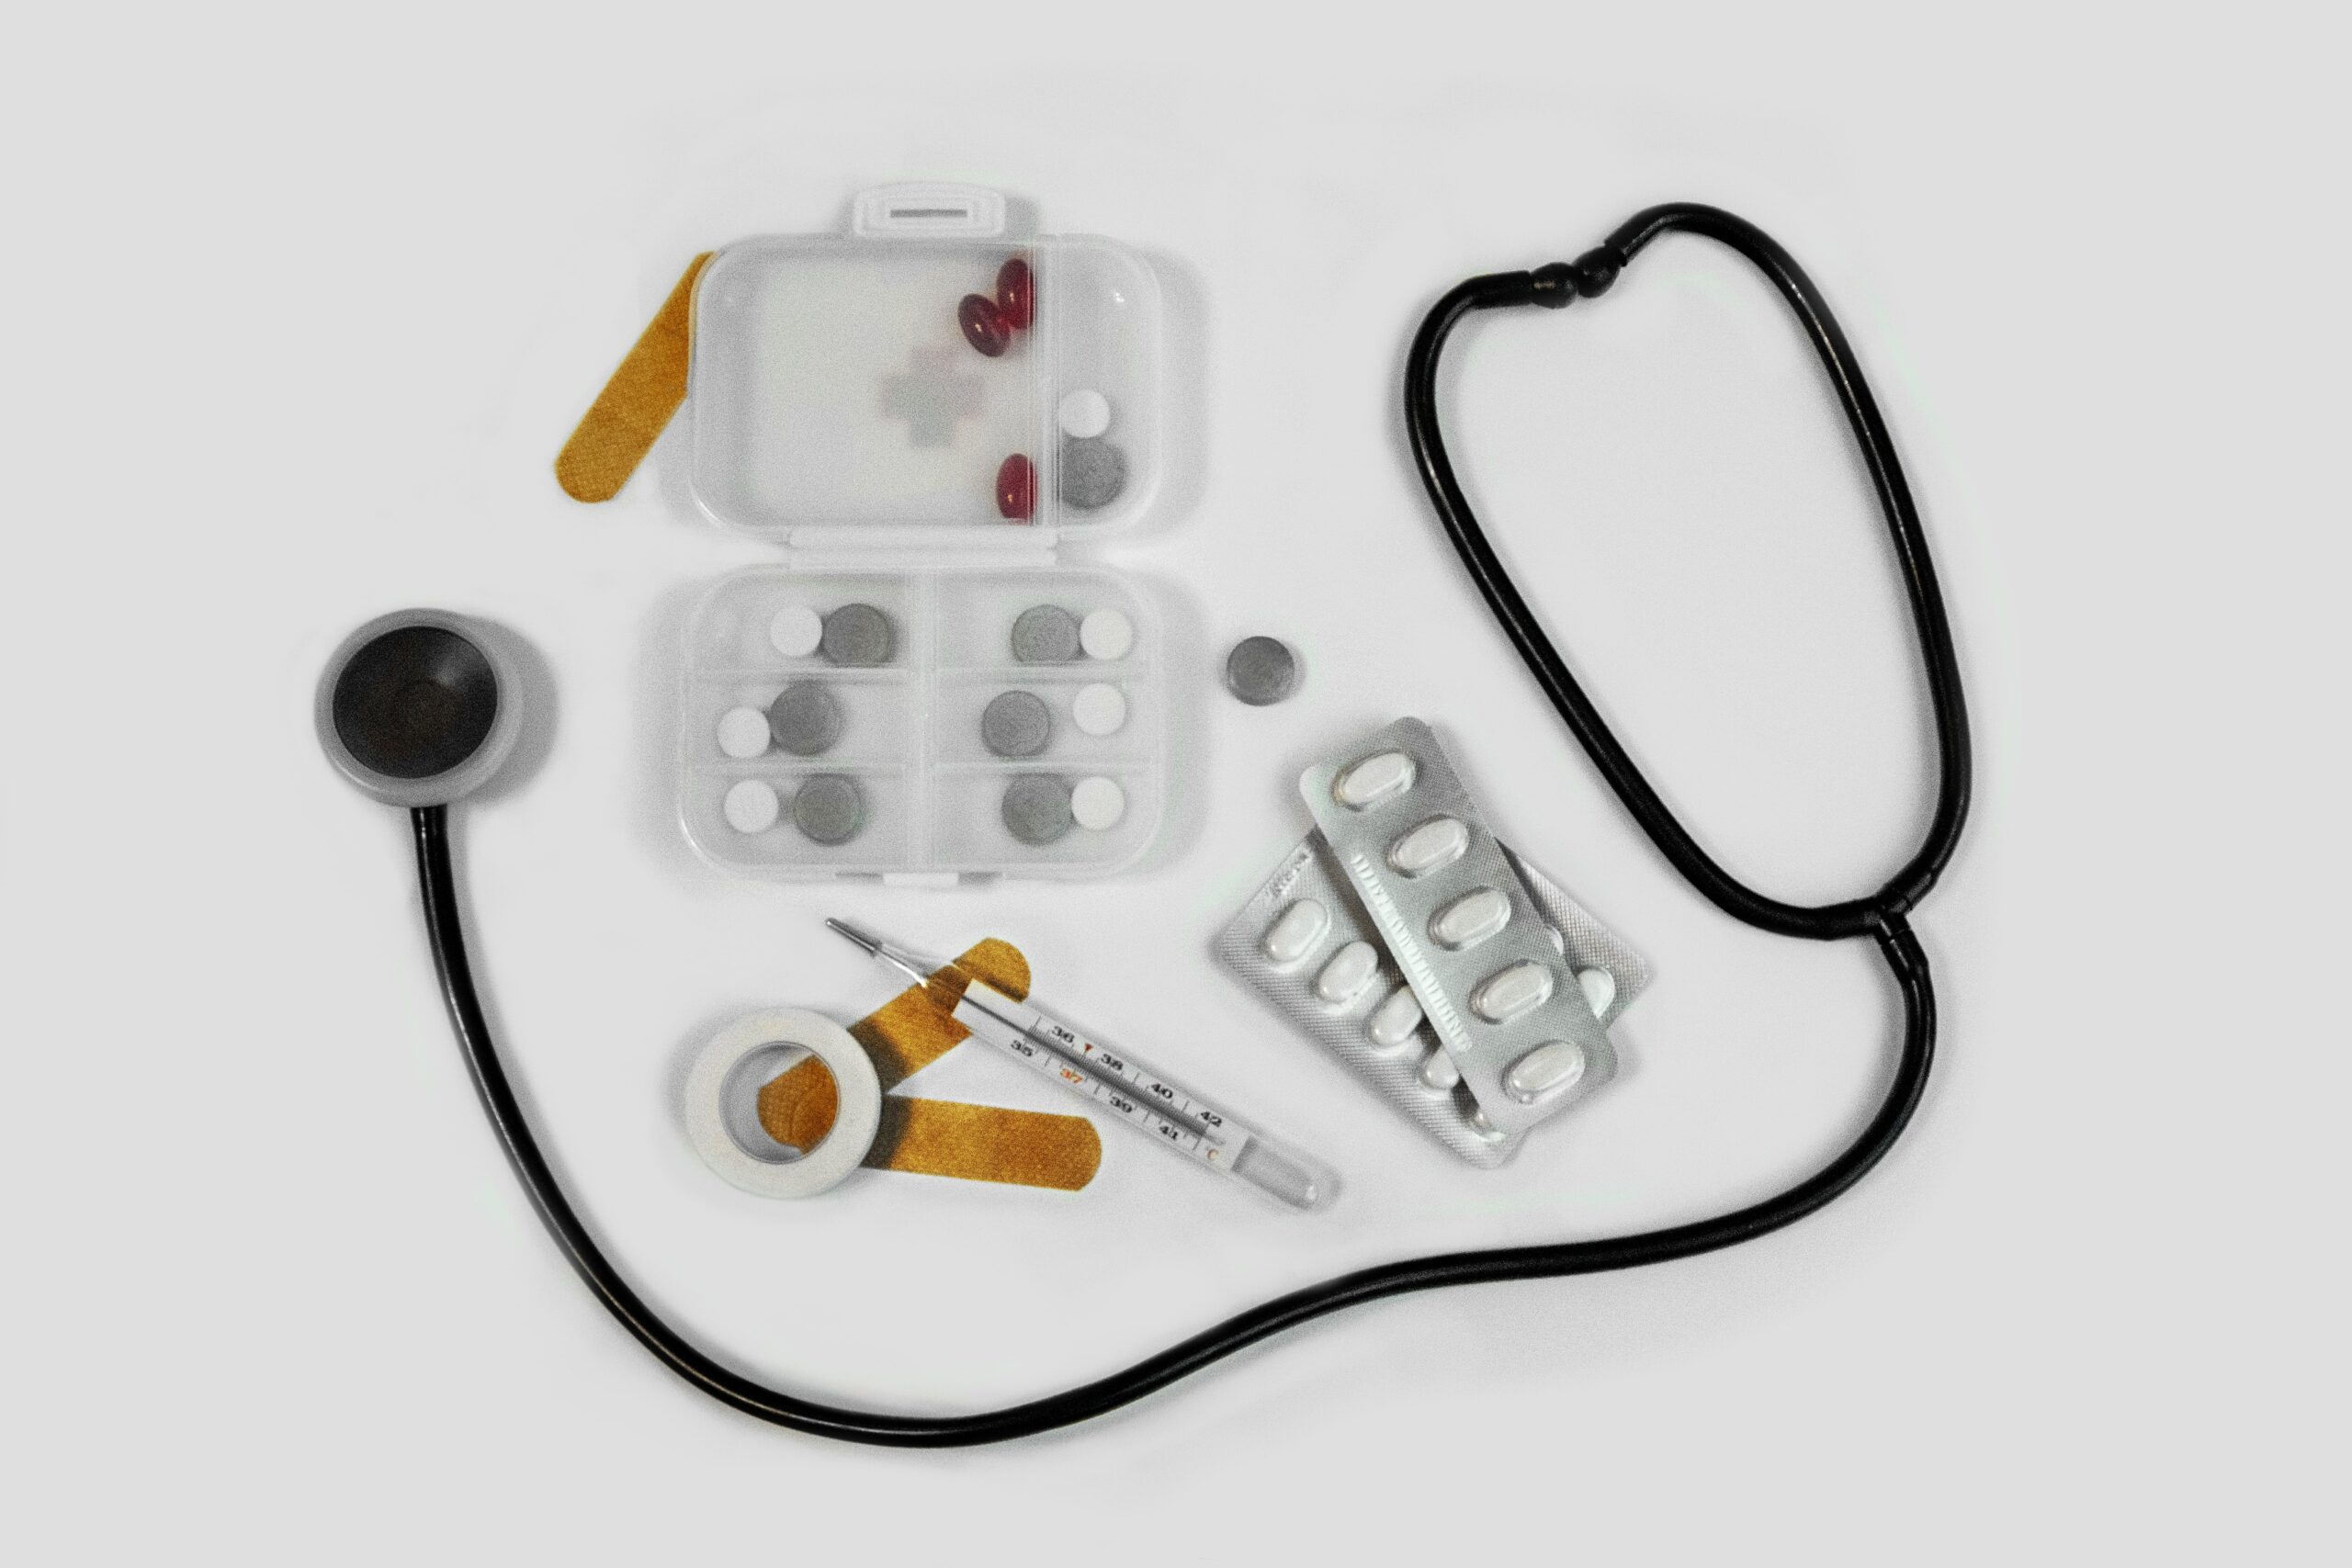 Photo of stethoscope, vitamins, bandages, and thermometer.